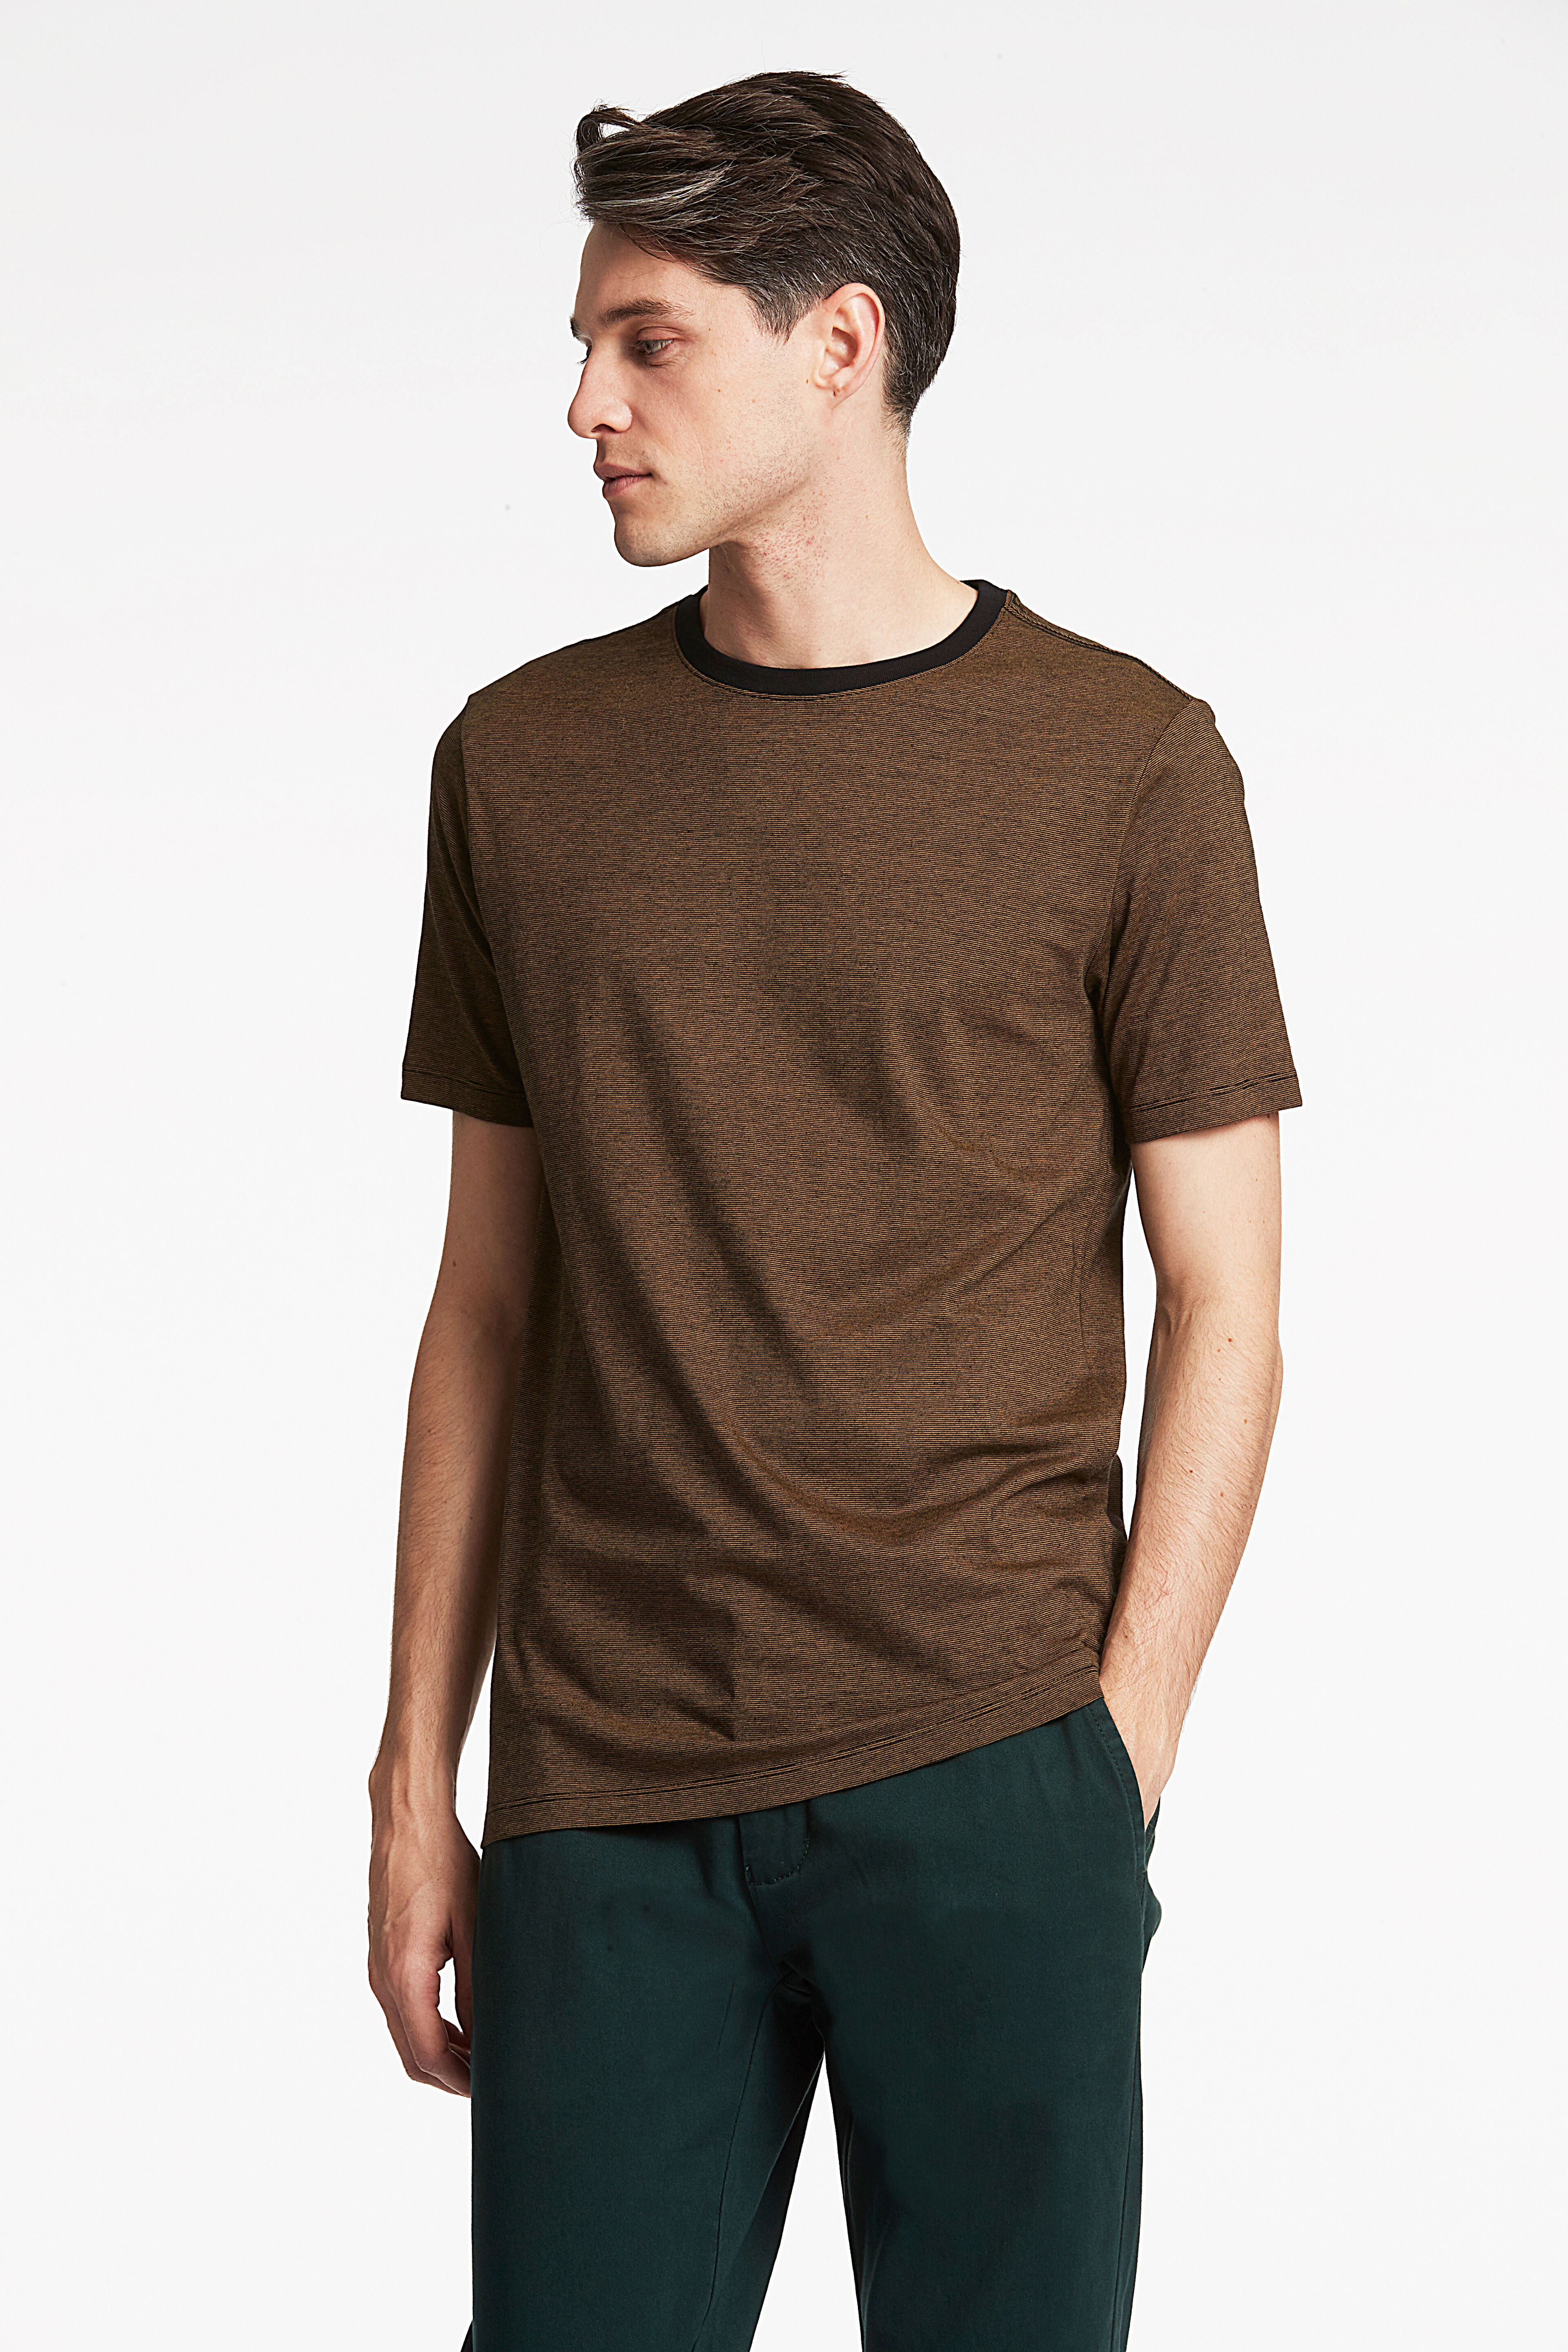 Tee | Relaxed fit